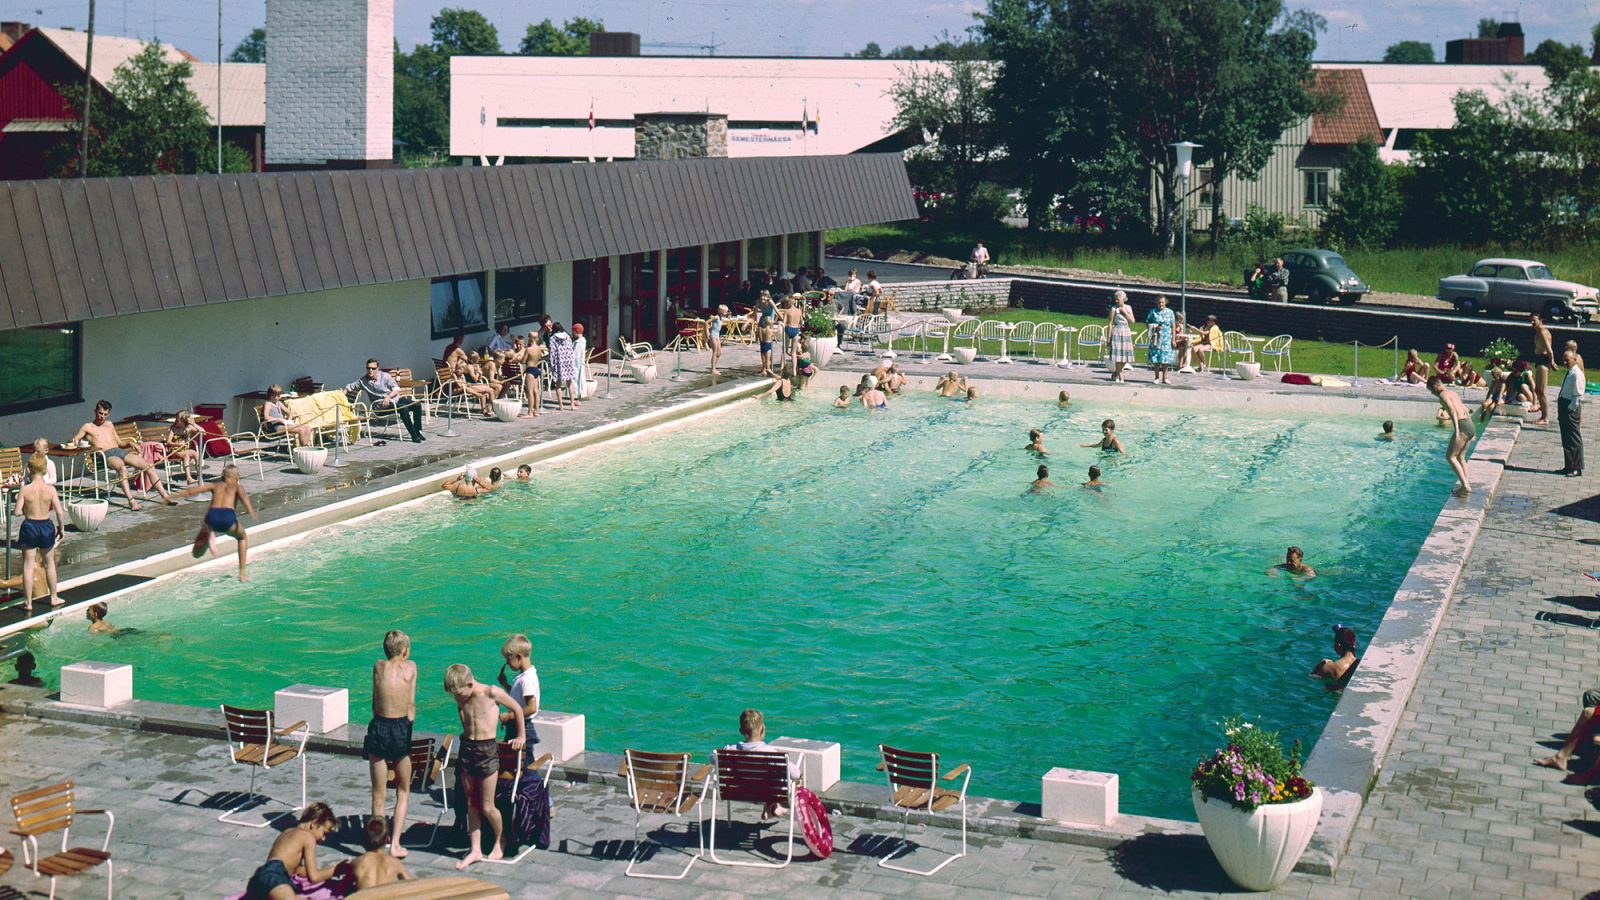 Large pool full of bathing children next to sunbeds and motel building, Motell IKEA. 1950s cars in background.